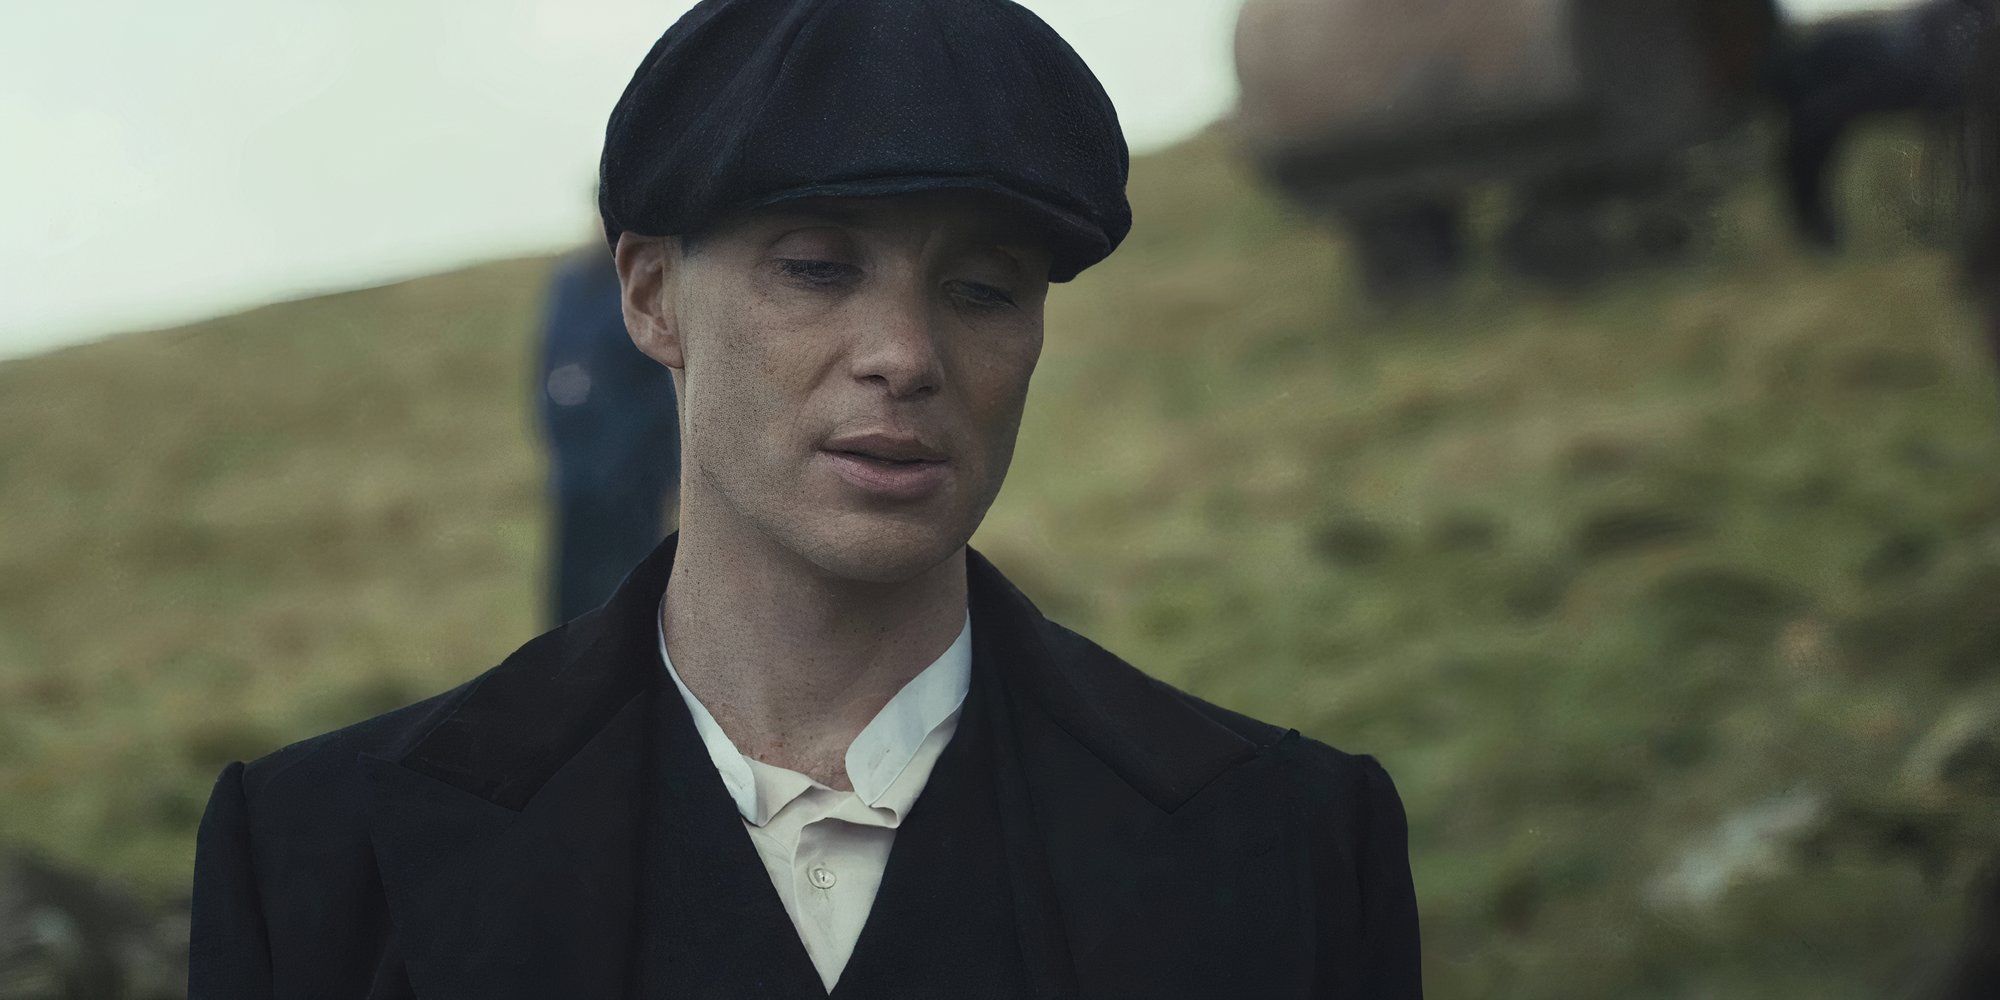 Cillian Murphy as Tommy Shelby in Peaky Blinders looking at the floor.